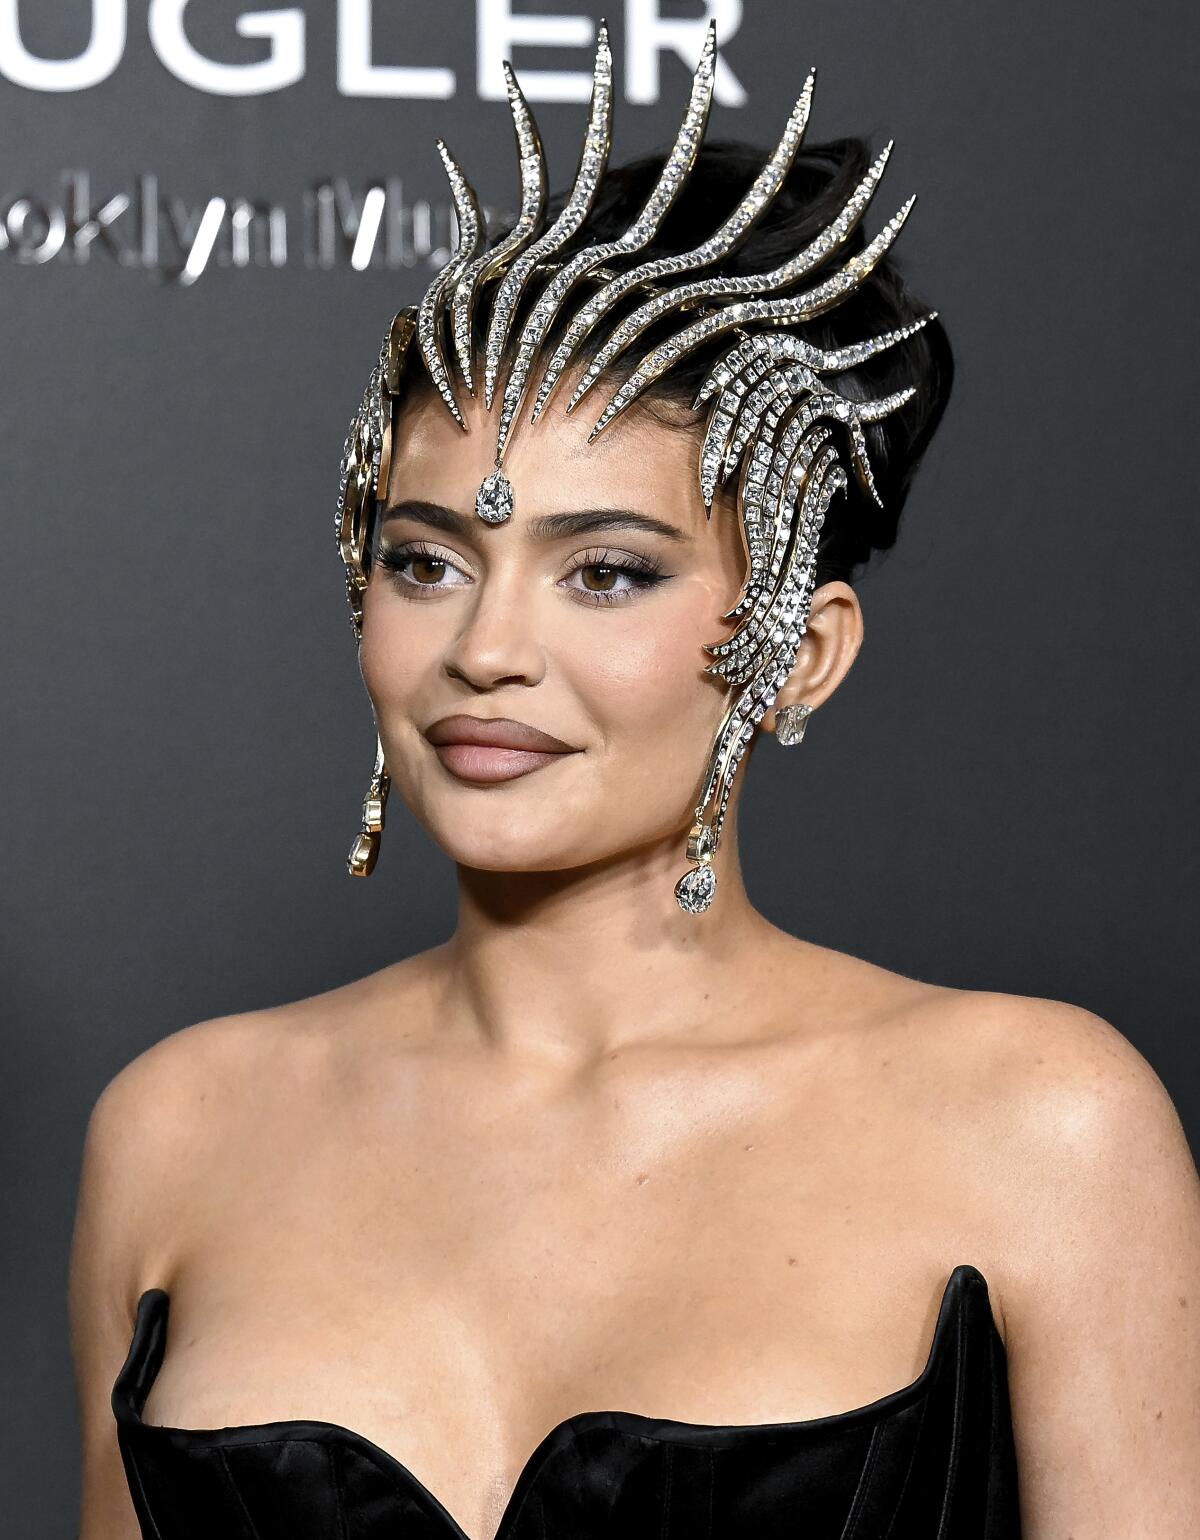 Kylie Jenner poses in a strapless gown and diamond encrusted headpiece